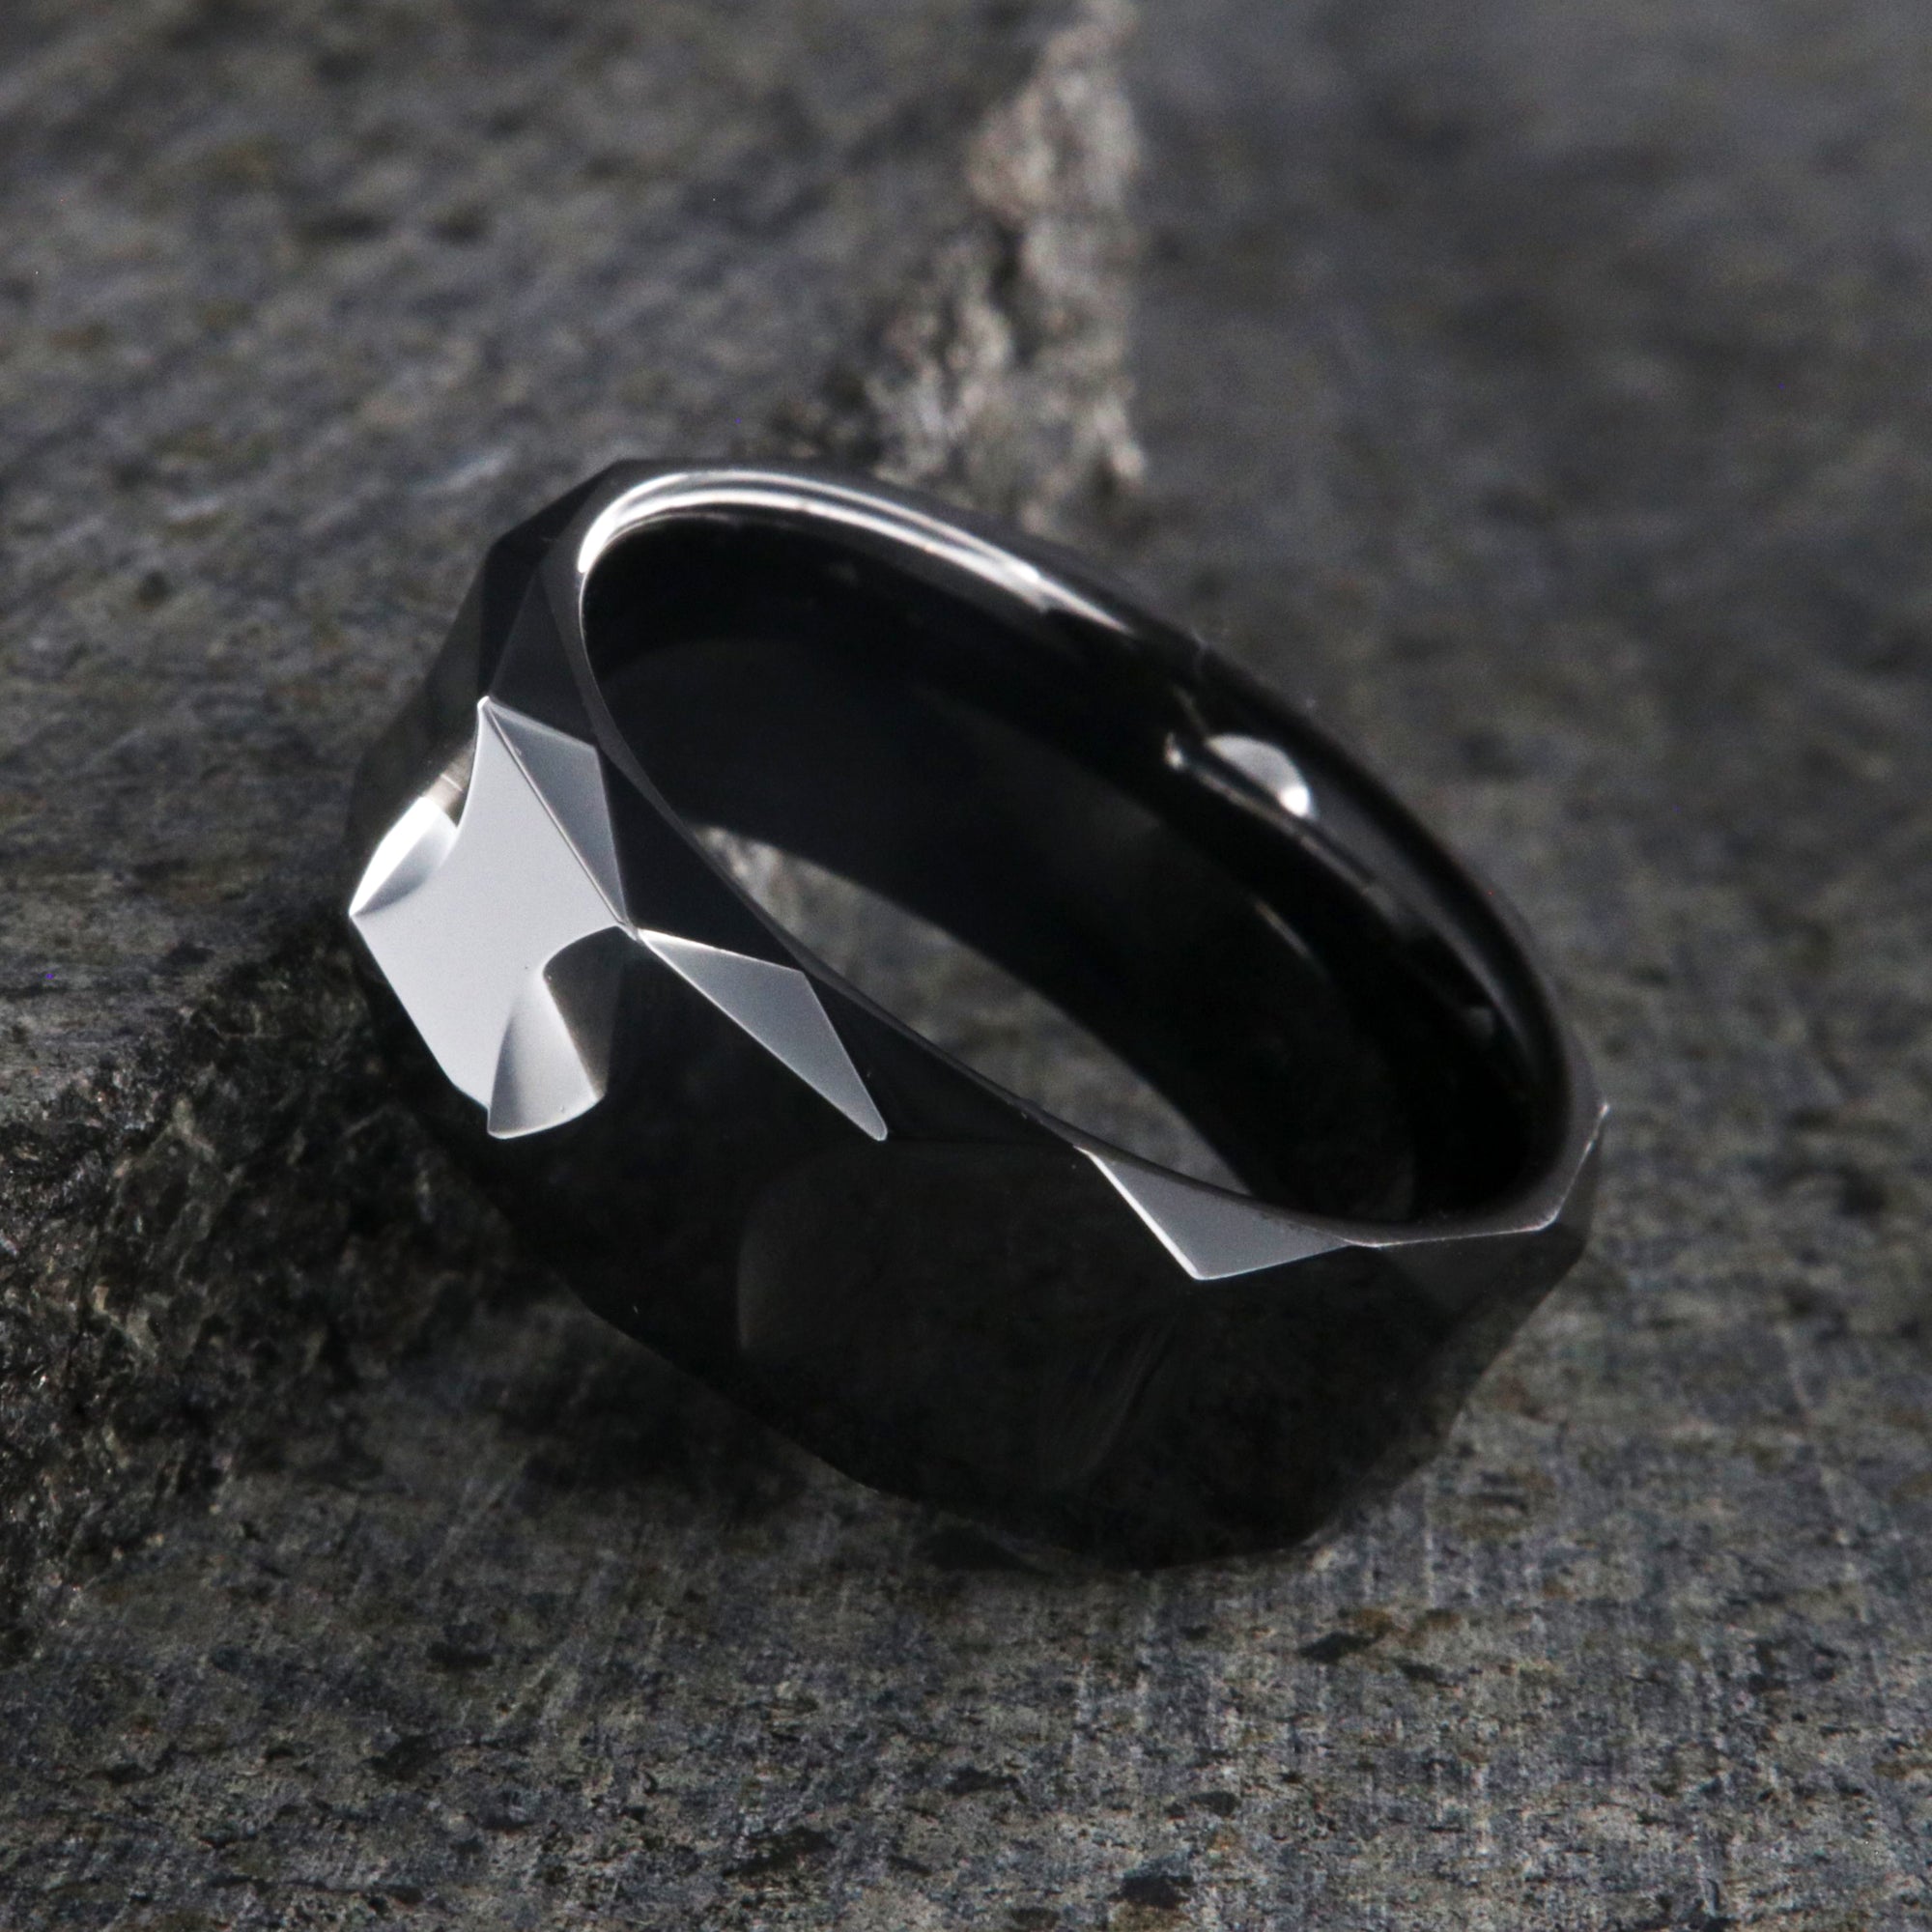 8mm wide black ceramic ring with diamond texture